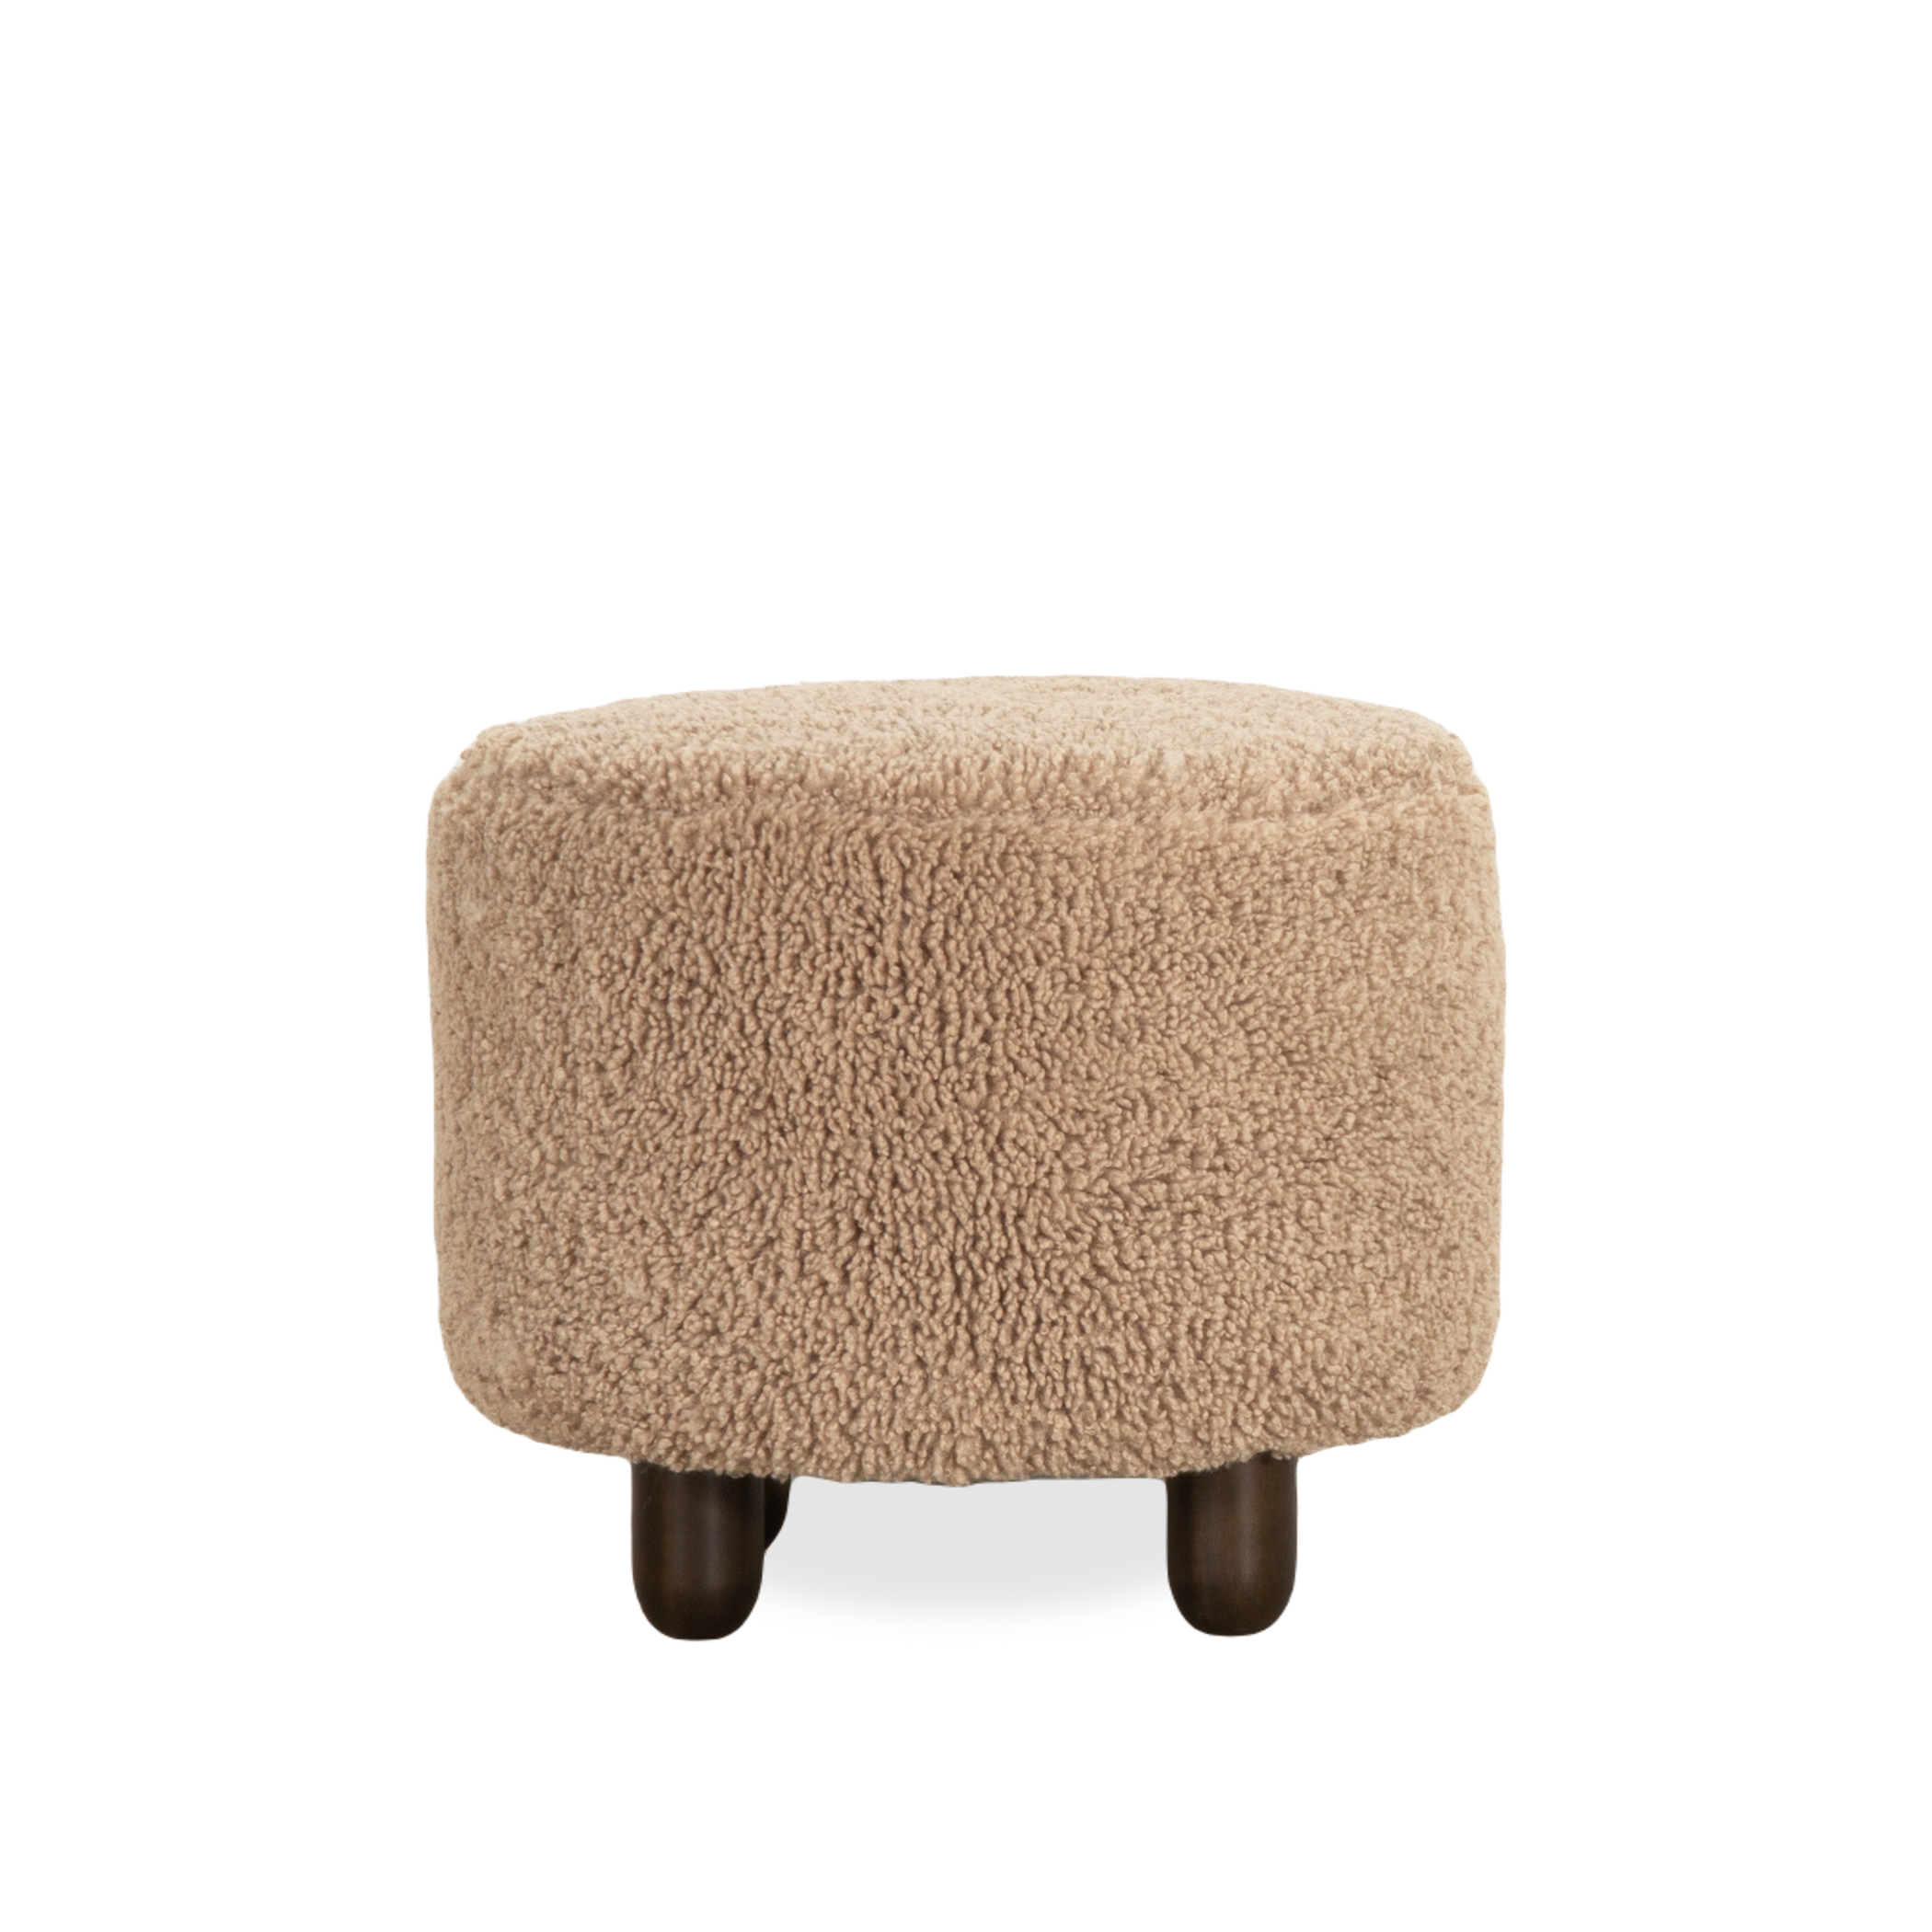 Add warm neutral tones and textures into your space with the Colt Ottoman.